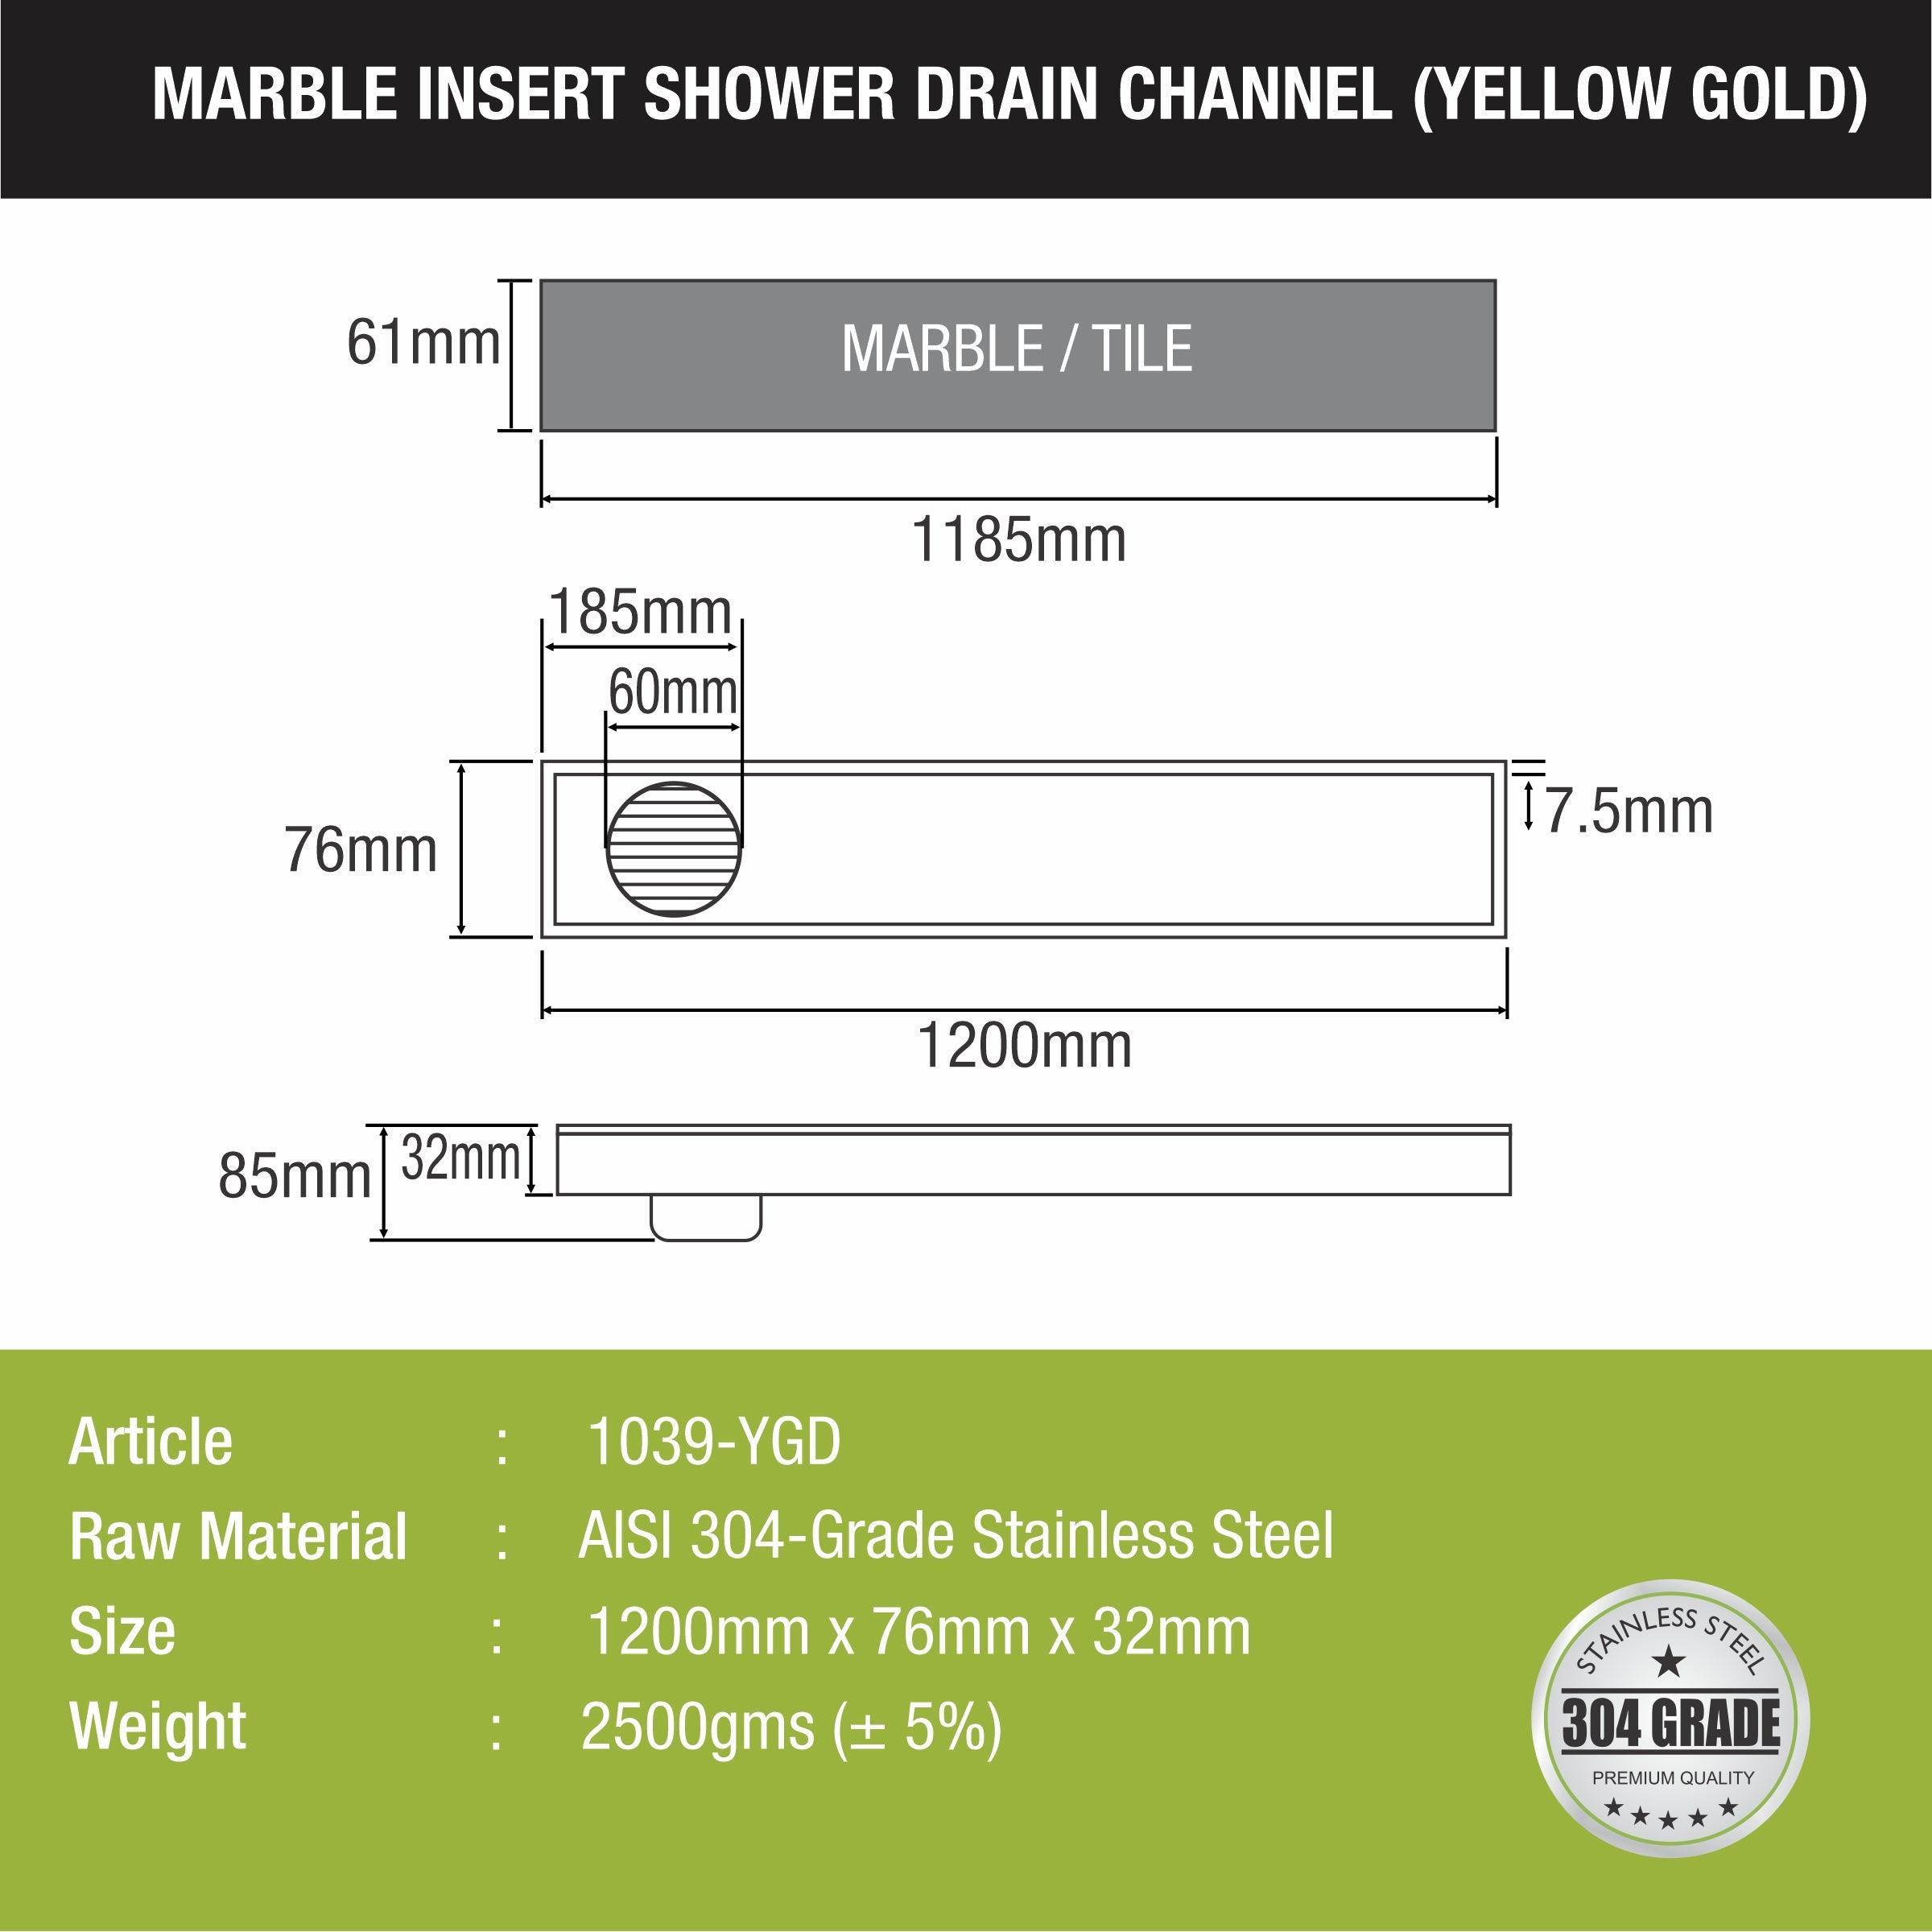 Marble Insert Shower Drain Channel - Yellow Gold (48 x 3 Inches) sizes and dimensions